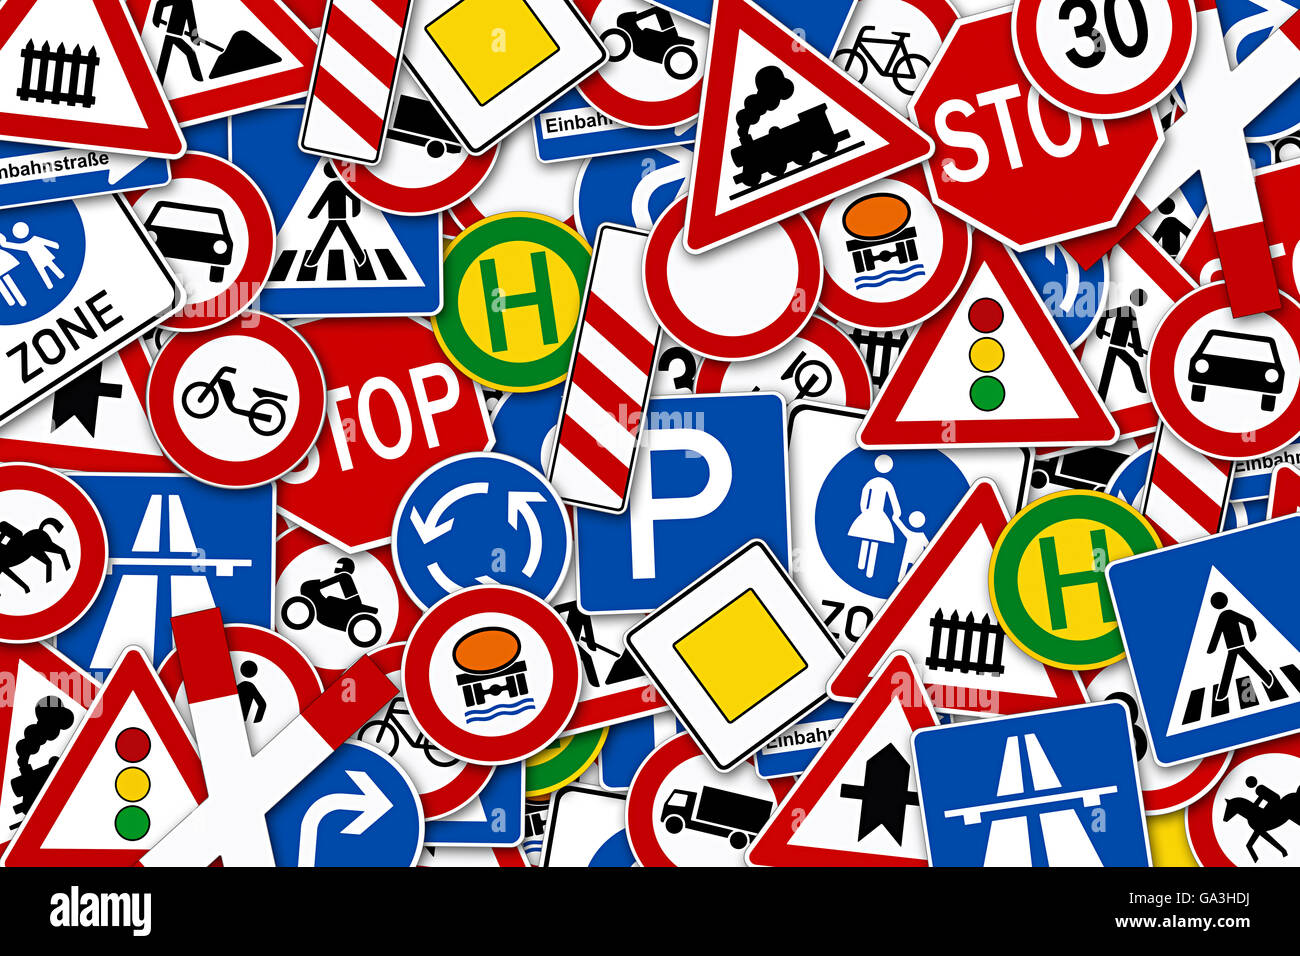 background collage of many road sign illustration Stock Photo